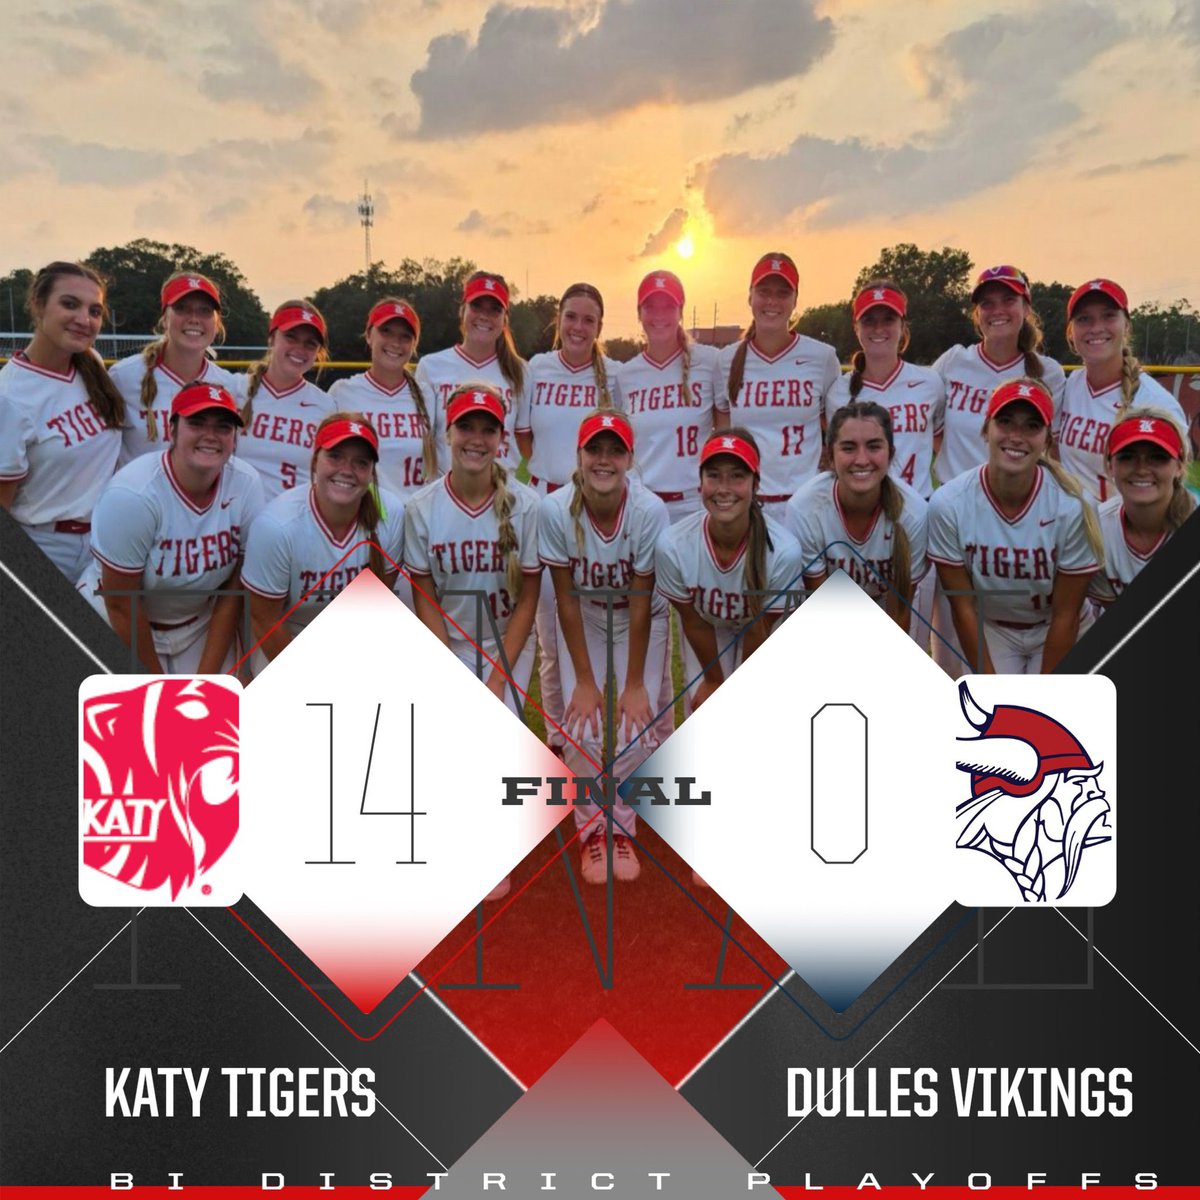 Katy continues their dominant play defeating Dulles 14-0. The win clinches the series for the tigers as they advance to the area round of the playoffs!